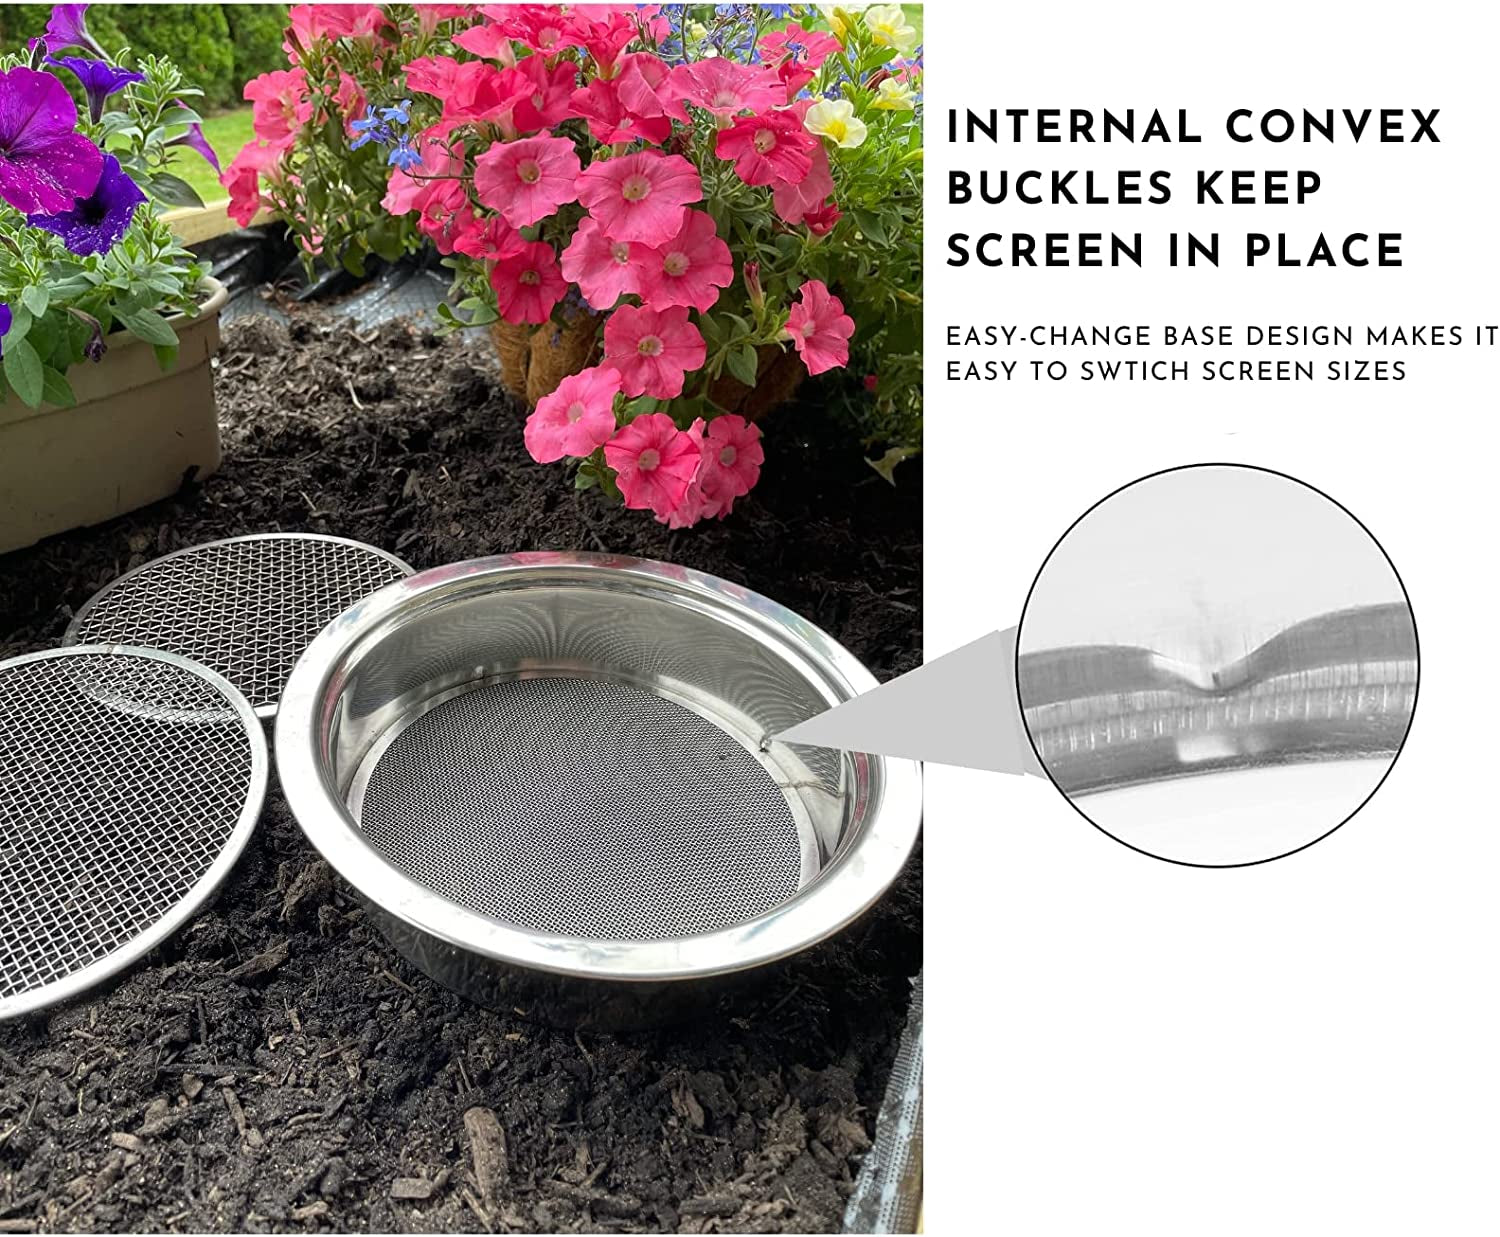 SOIL SIFTER, Garden Sieve Sifting Soil Sifter - Stainless Sieve,Φ9.5In Garden Sifter Interchangeable Sifting Pan Contain 3 Specification Soil Sieve,Soil Scoops Dirt Sifter for Sifting Soil,Peat Moss and More.